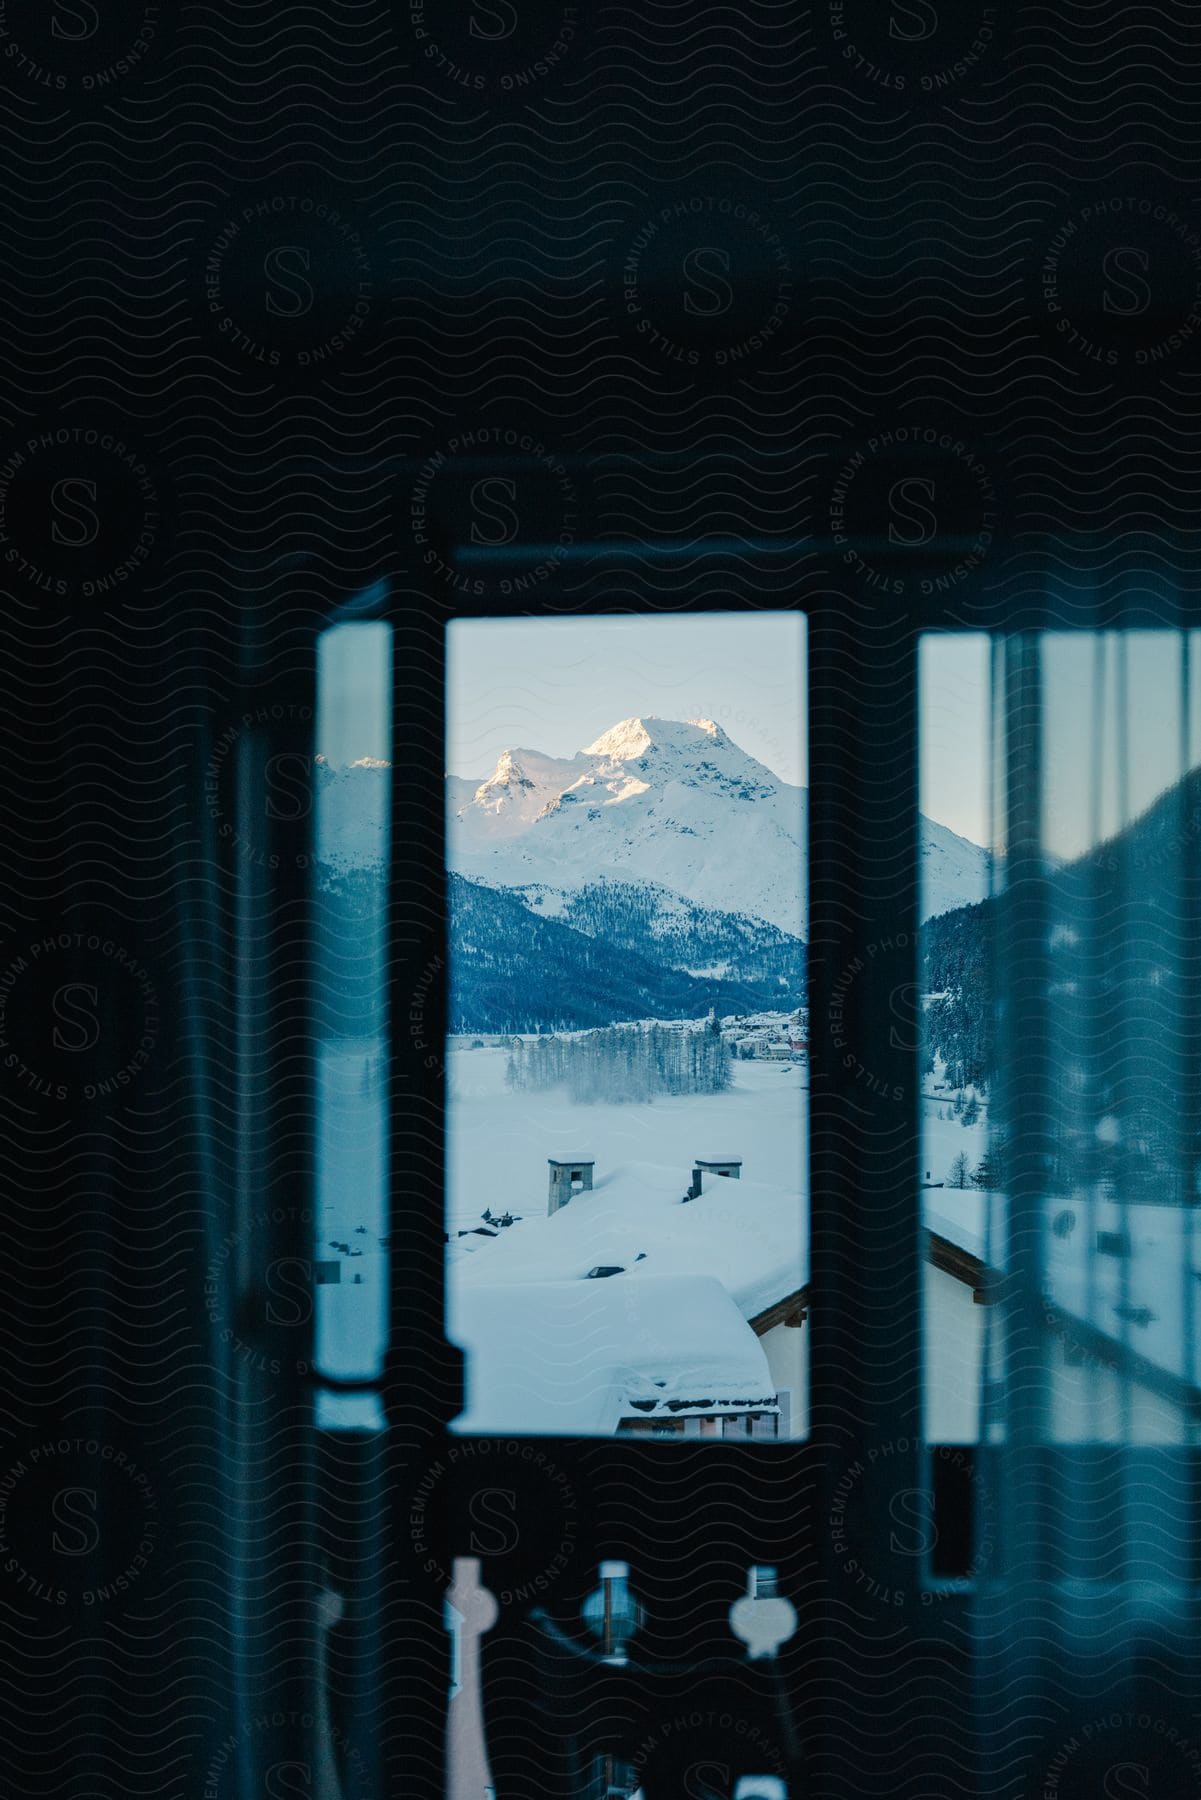 View from the window of urban houses on a snow-covered ground and mountains around